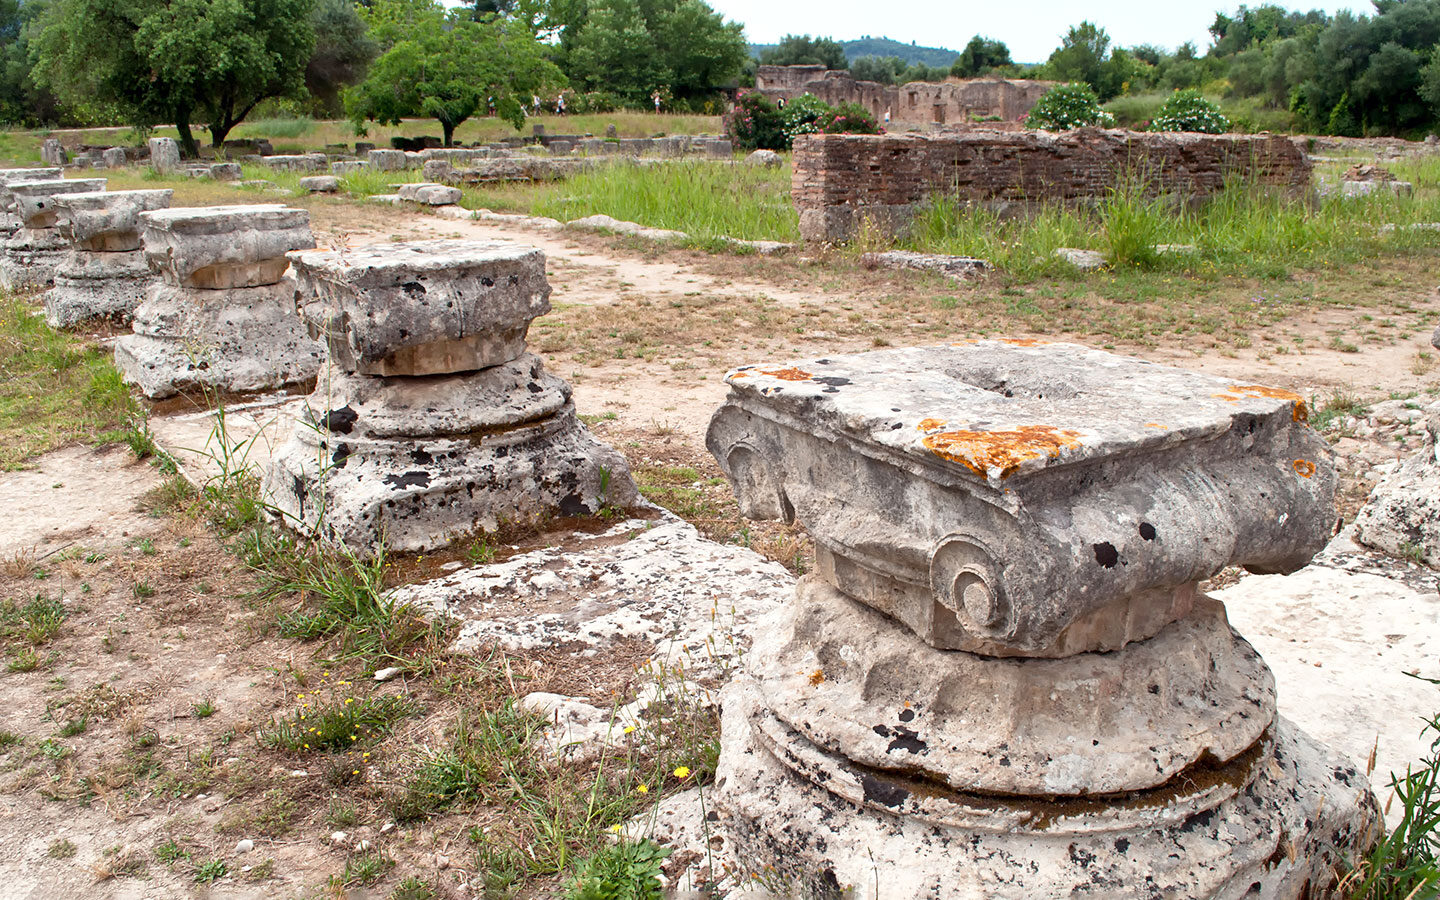 Visiting the archaeological site of Olympia